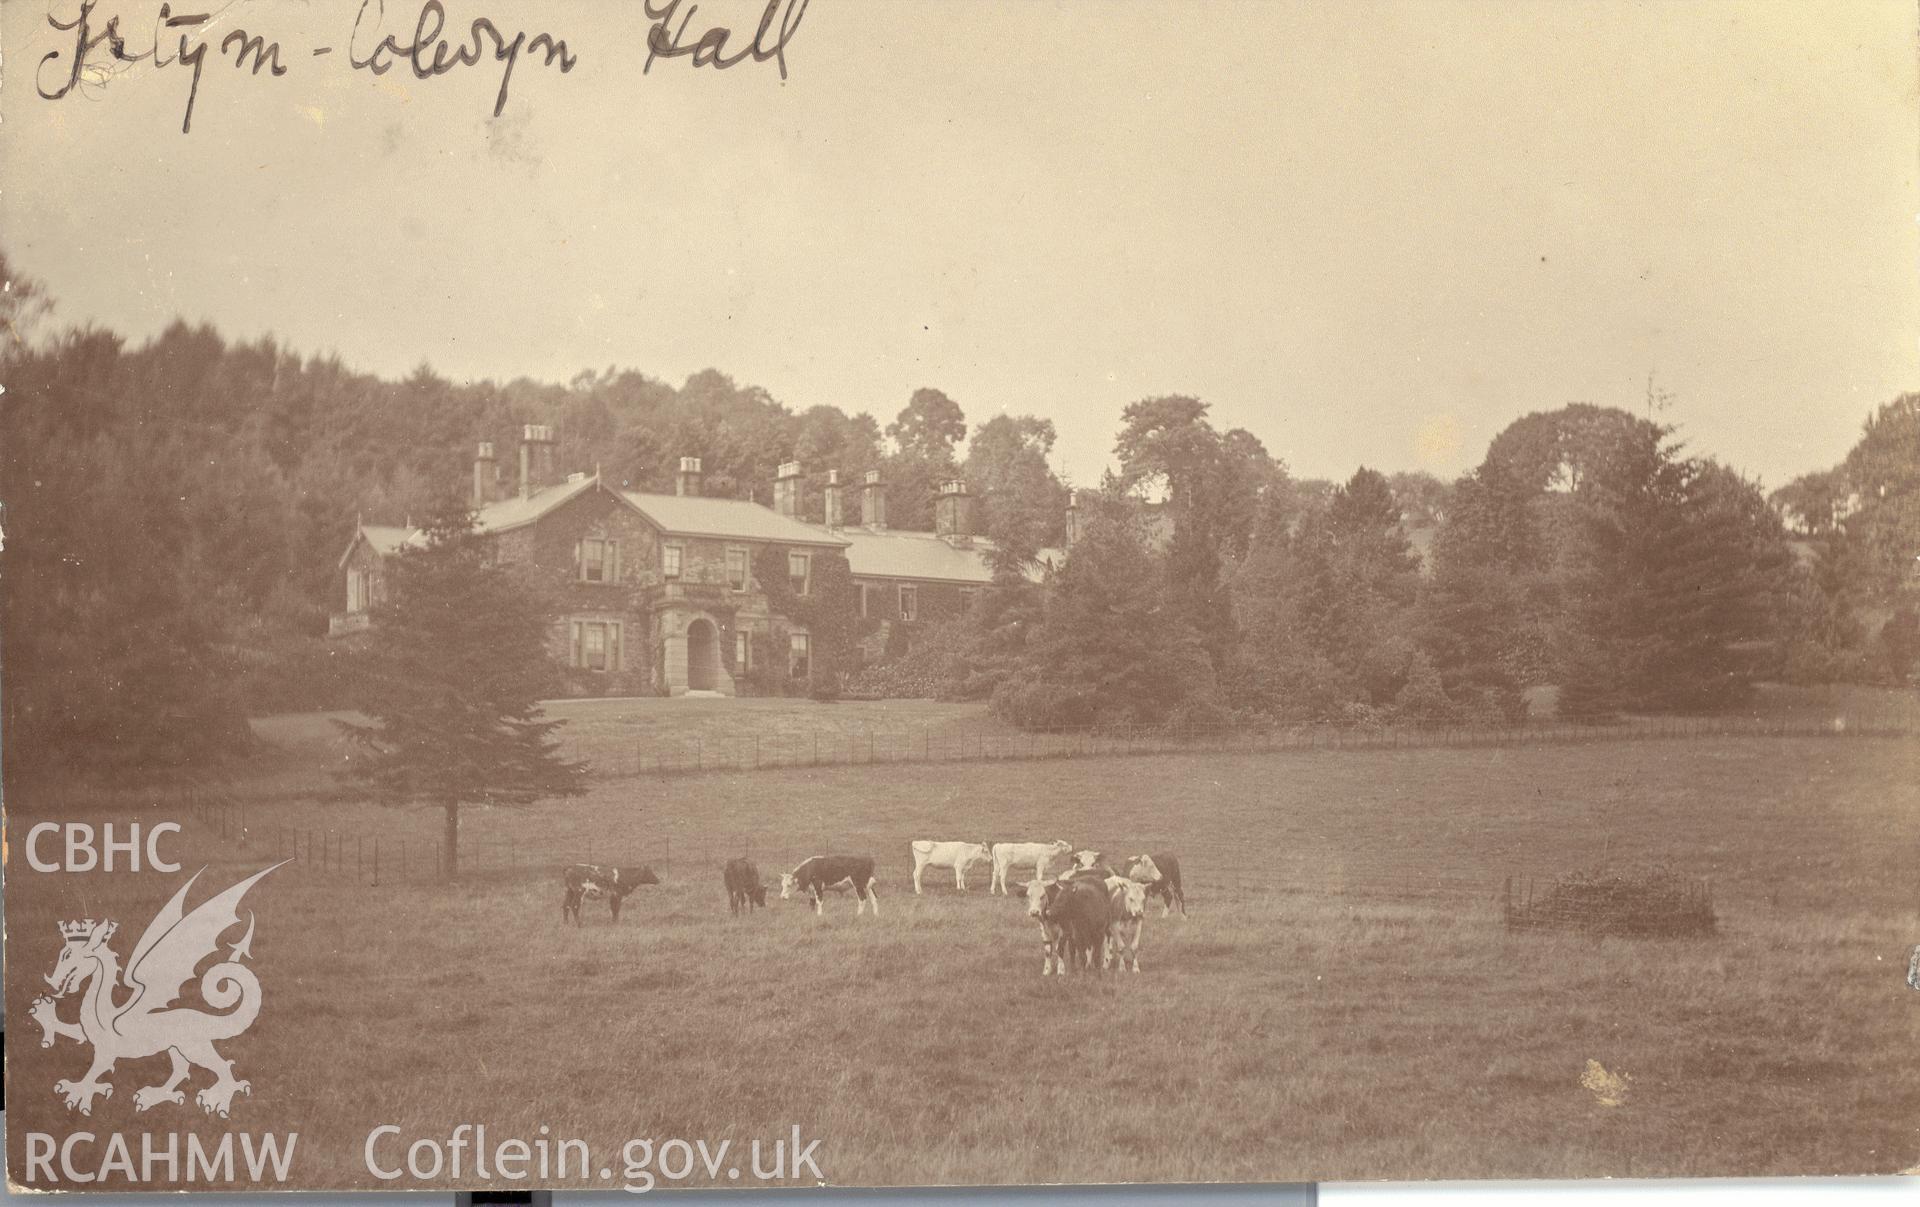 Digitised postcard image of Ystym Colwyn Hall, with cattle. Produced by Parks and Gardens Data Services, from an original item in the Peter Davis Collection at Parks and Gardens UK. We hold only web-resolution images of this collection, suitable for viewing on screen and for research purposes only. We do not hold the original images, or publication quality scans.